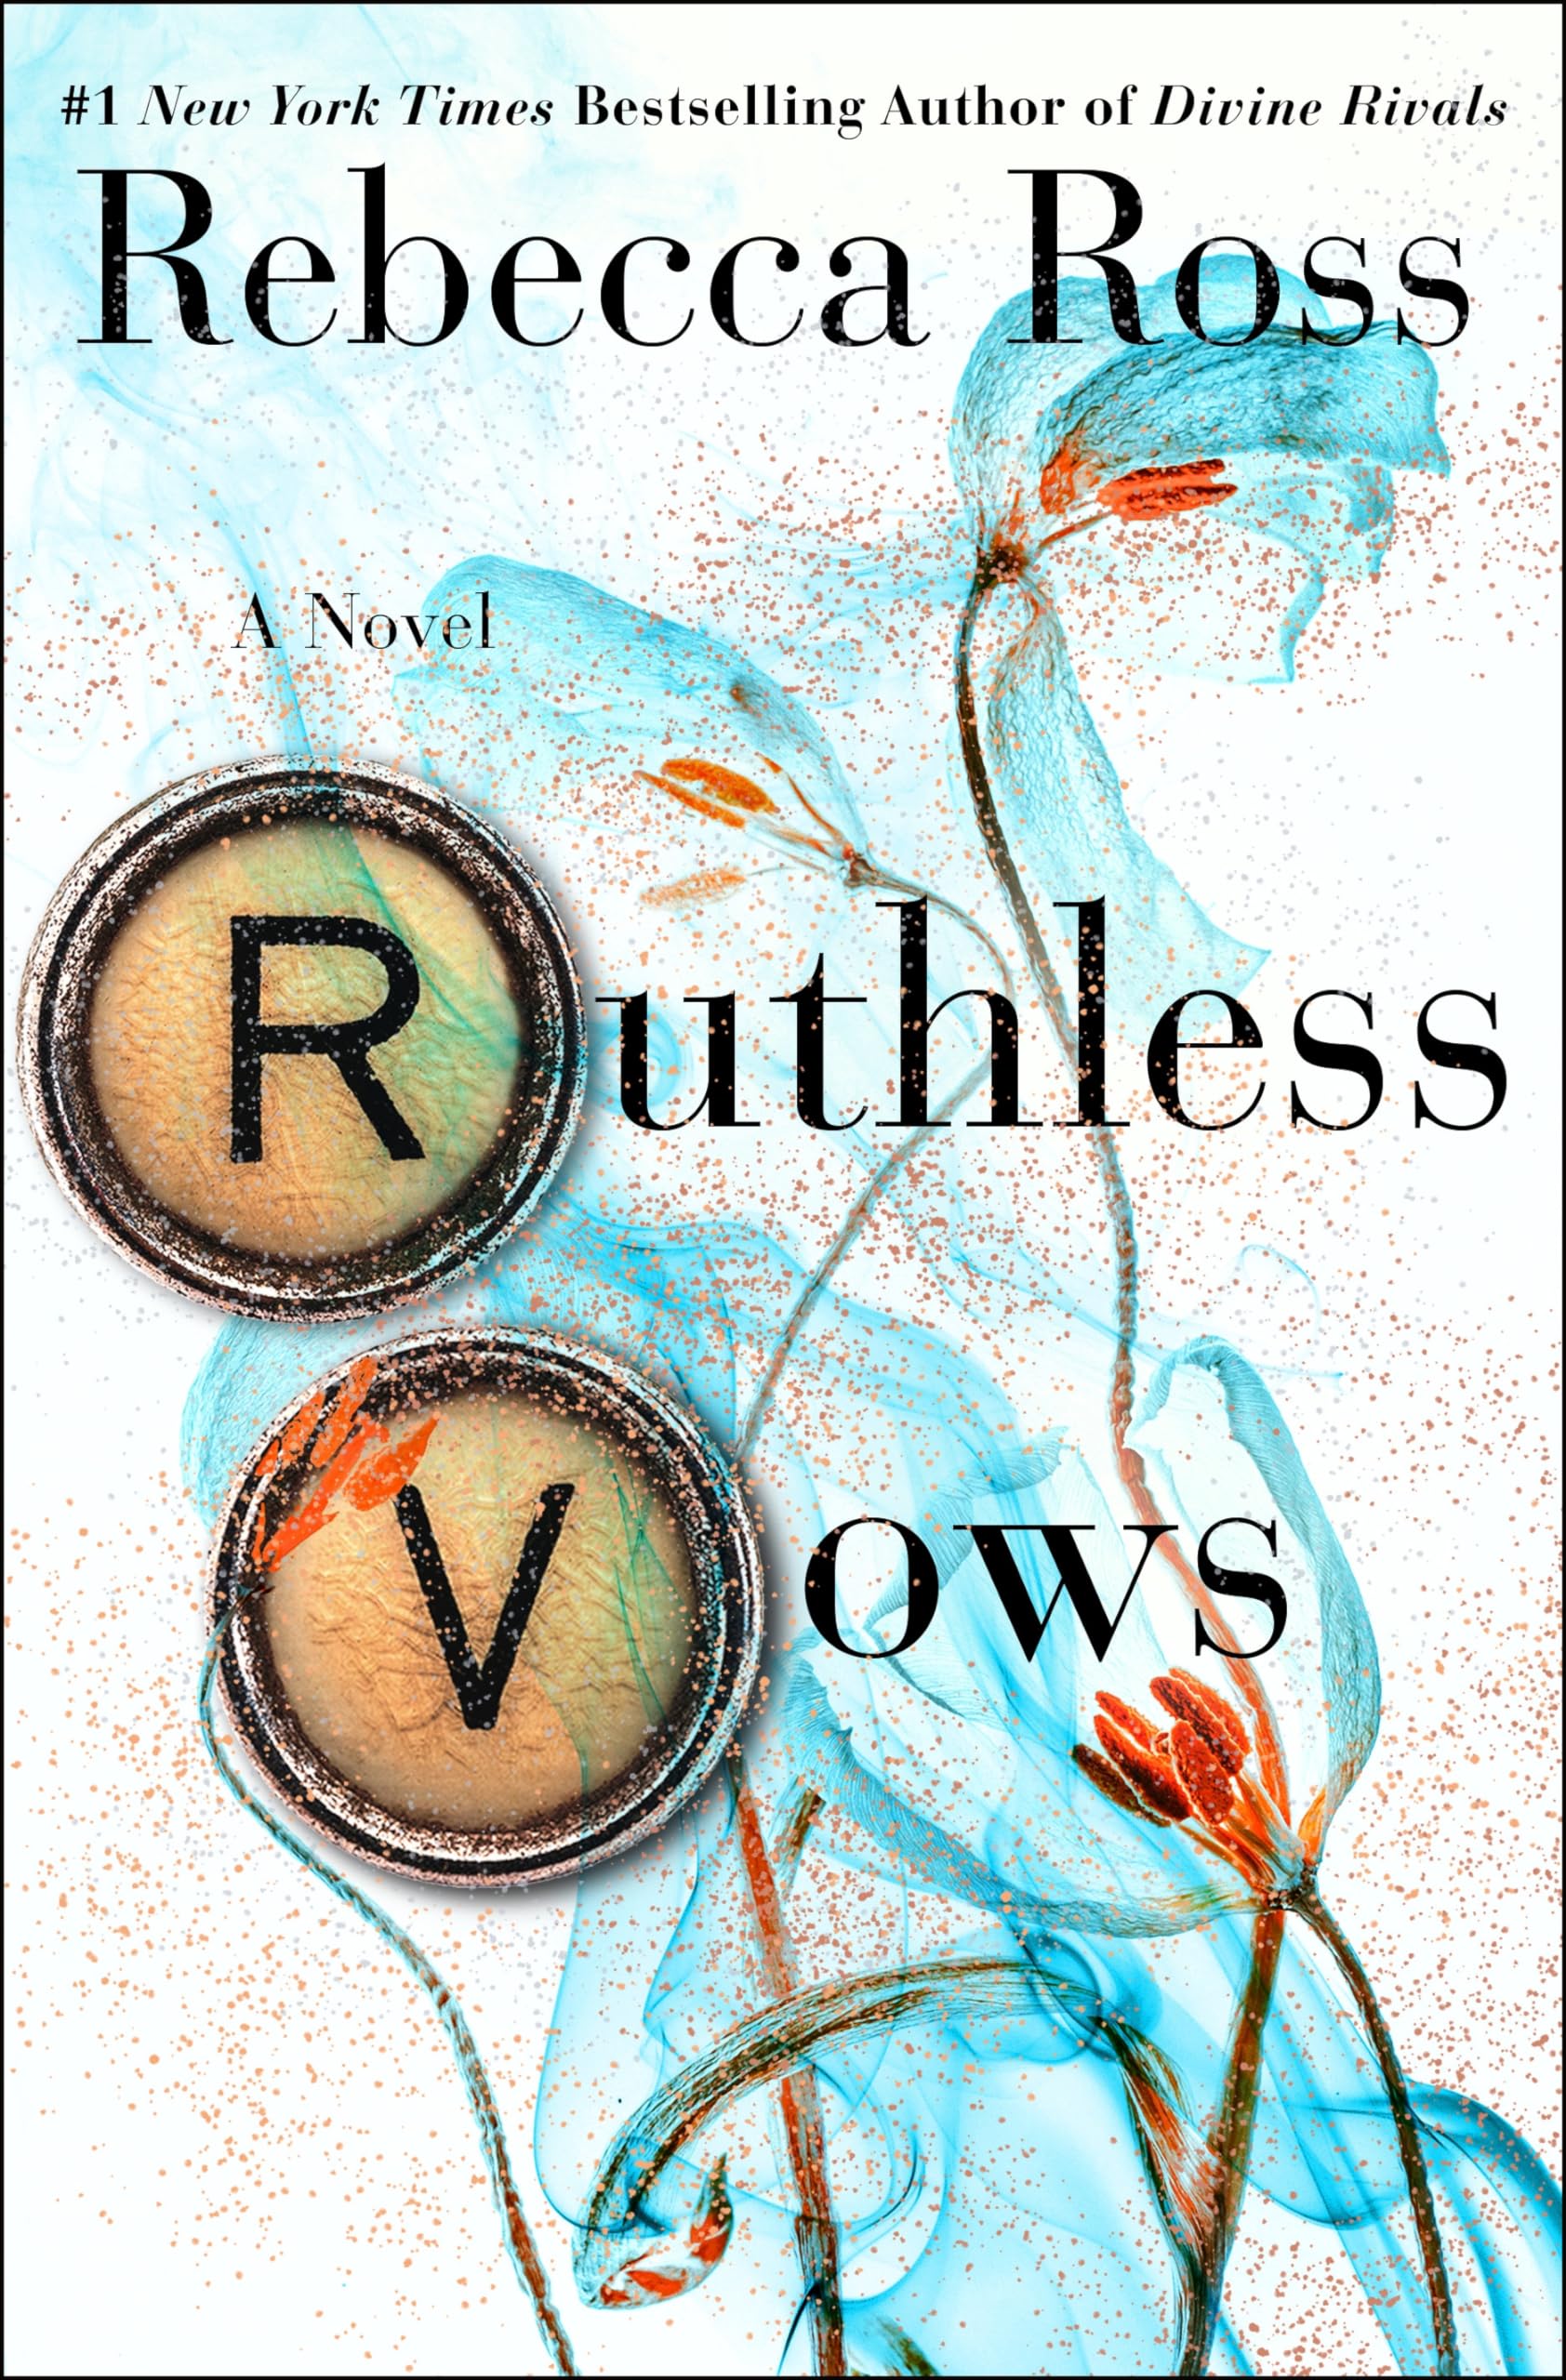 Ruthless Vows (Letters of Enchantment Book 2)